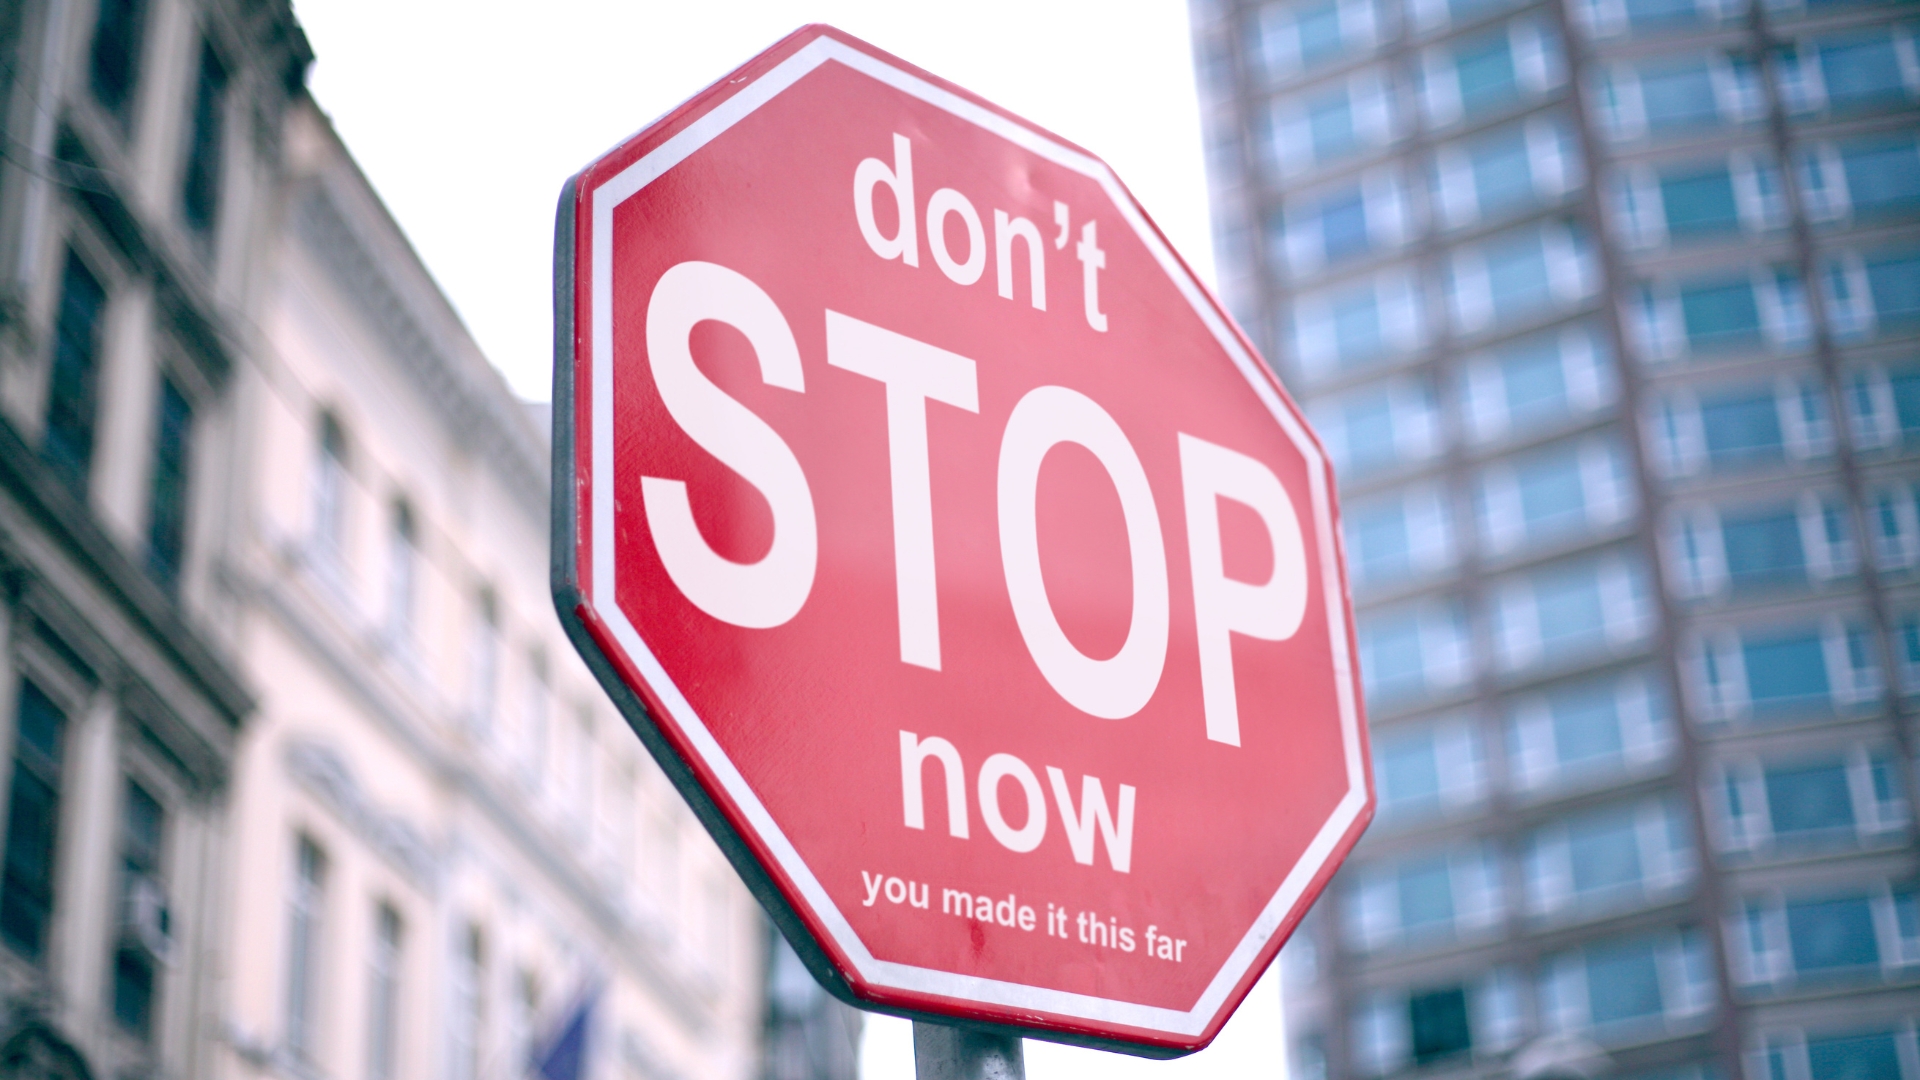 Stop sign with the words 'don't Stop now, you made it this far' on it